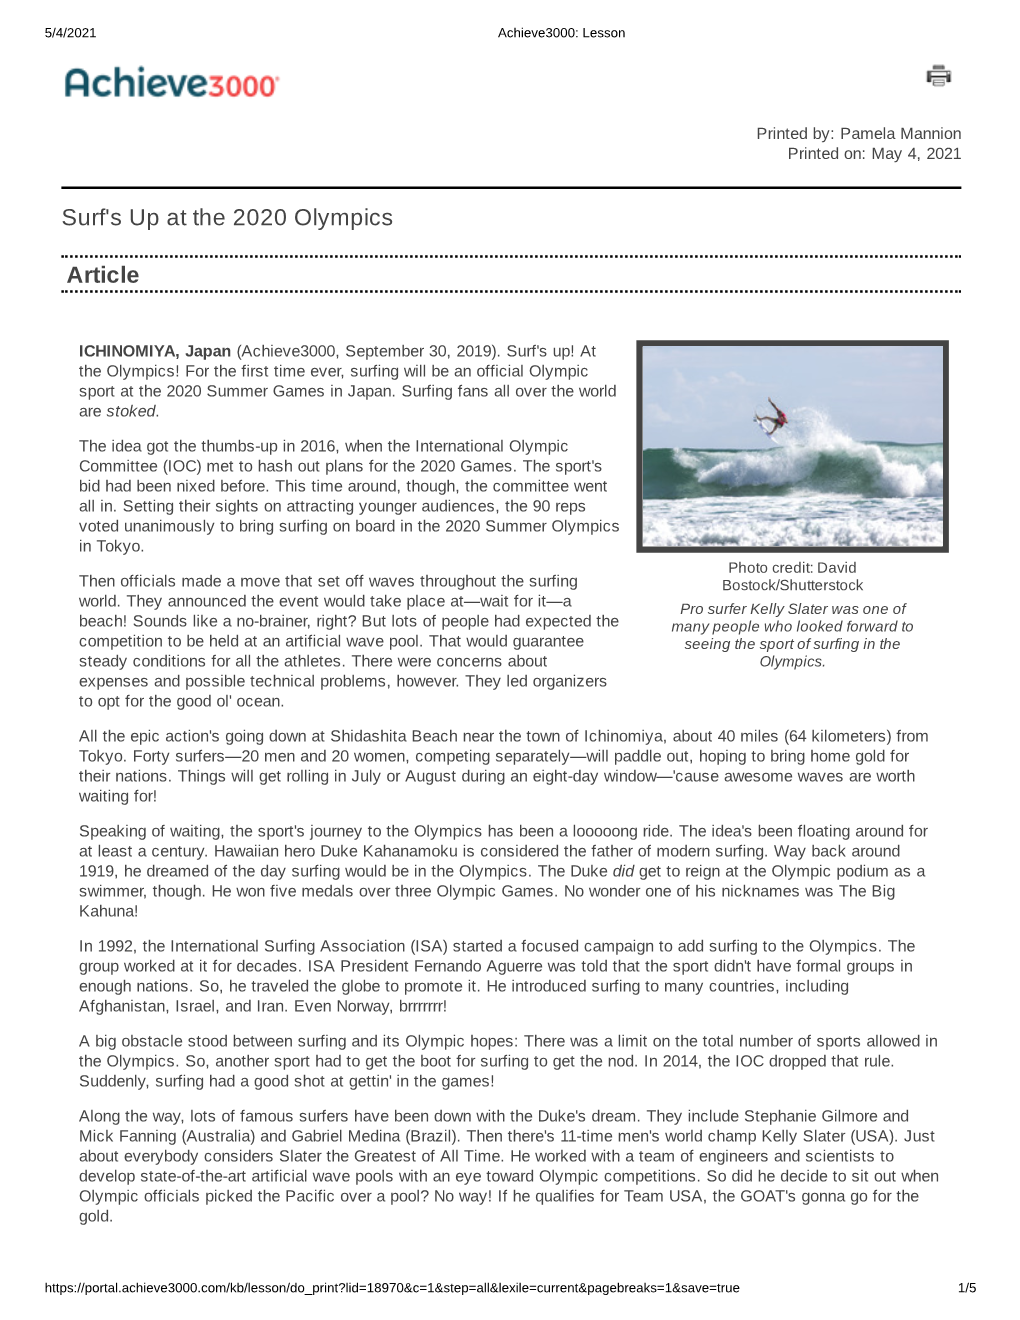 Surf's up at the 2020 Olympics Article